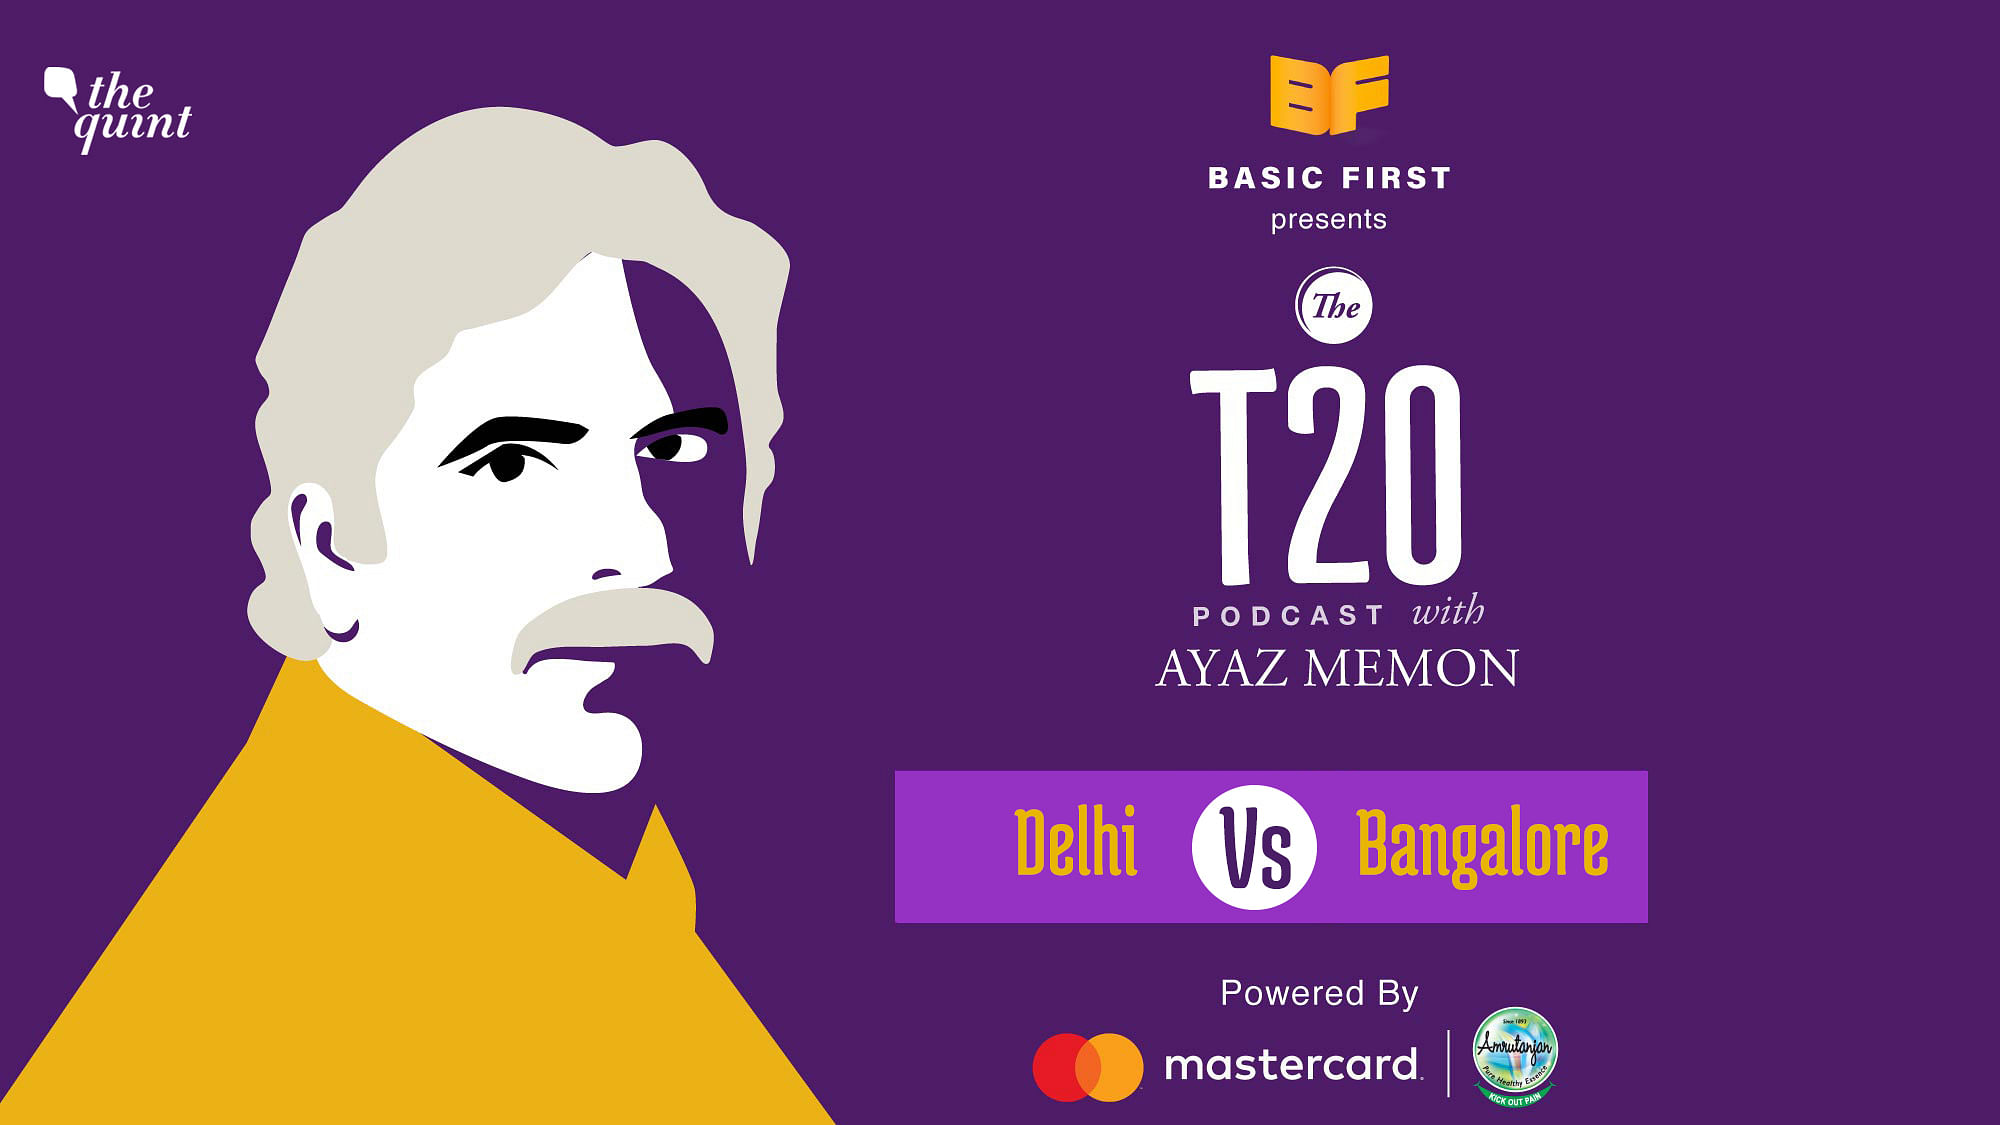 On Episode 55 of The T20 Podcast, Ayaz Memon and Mendra Dorjey discuss the match with two winners.